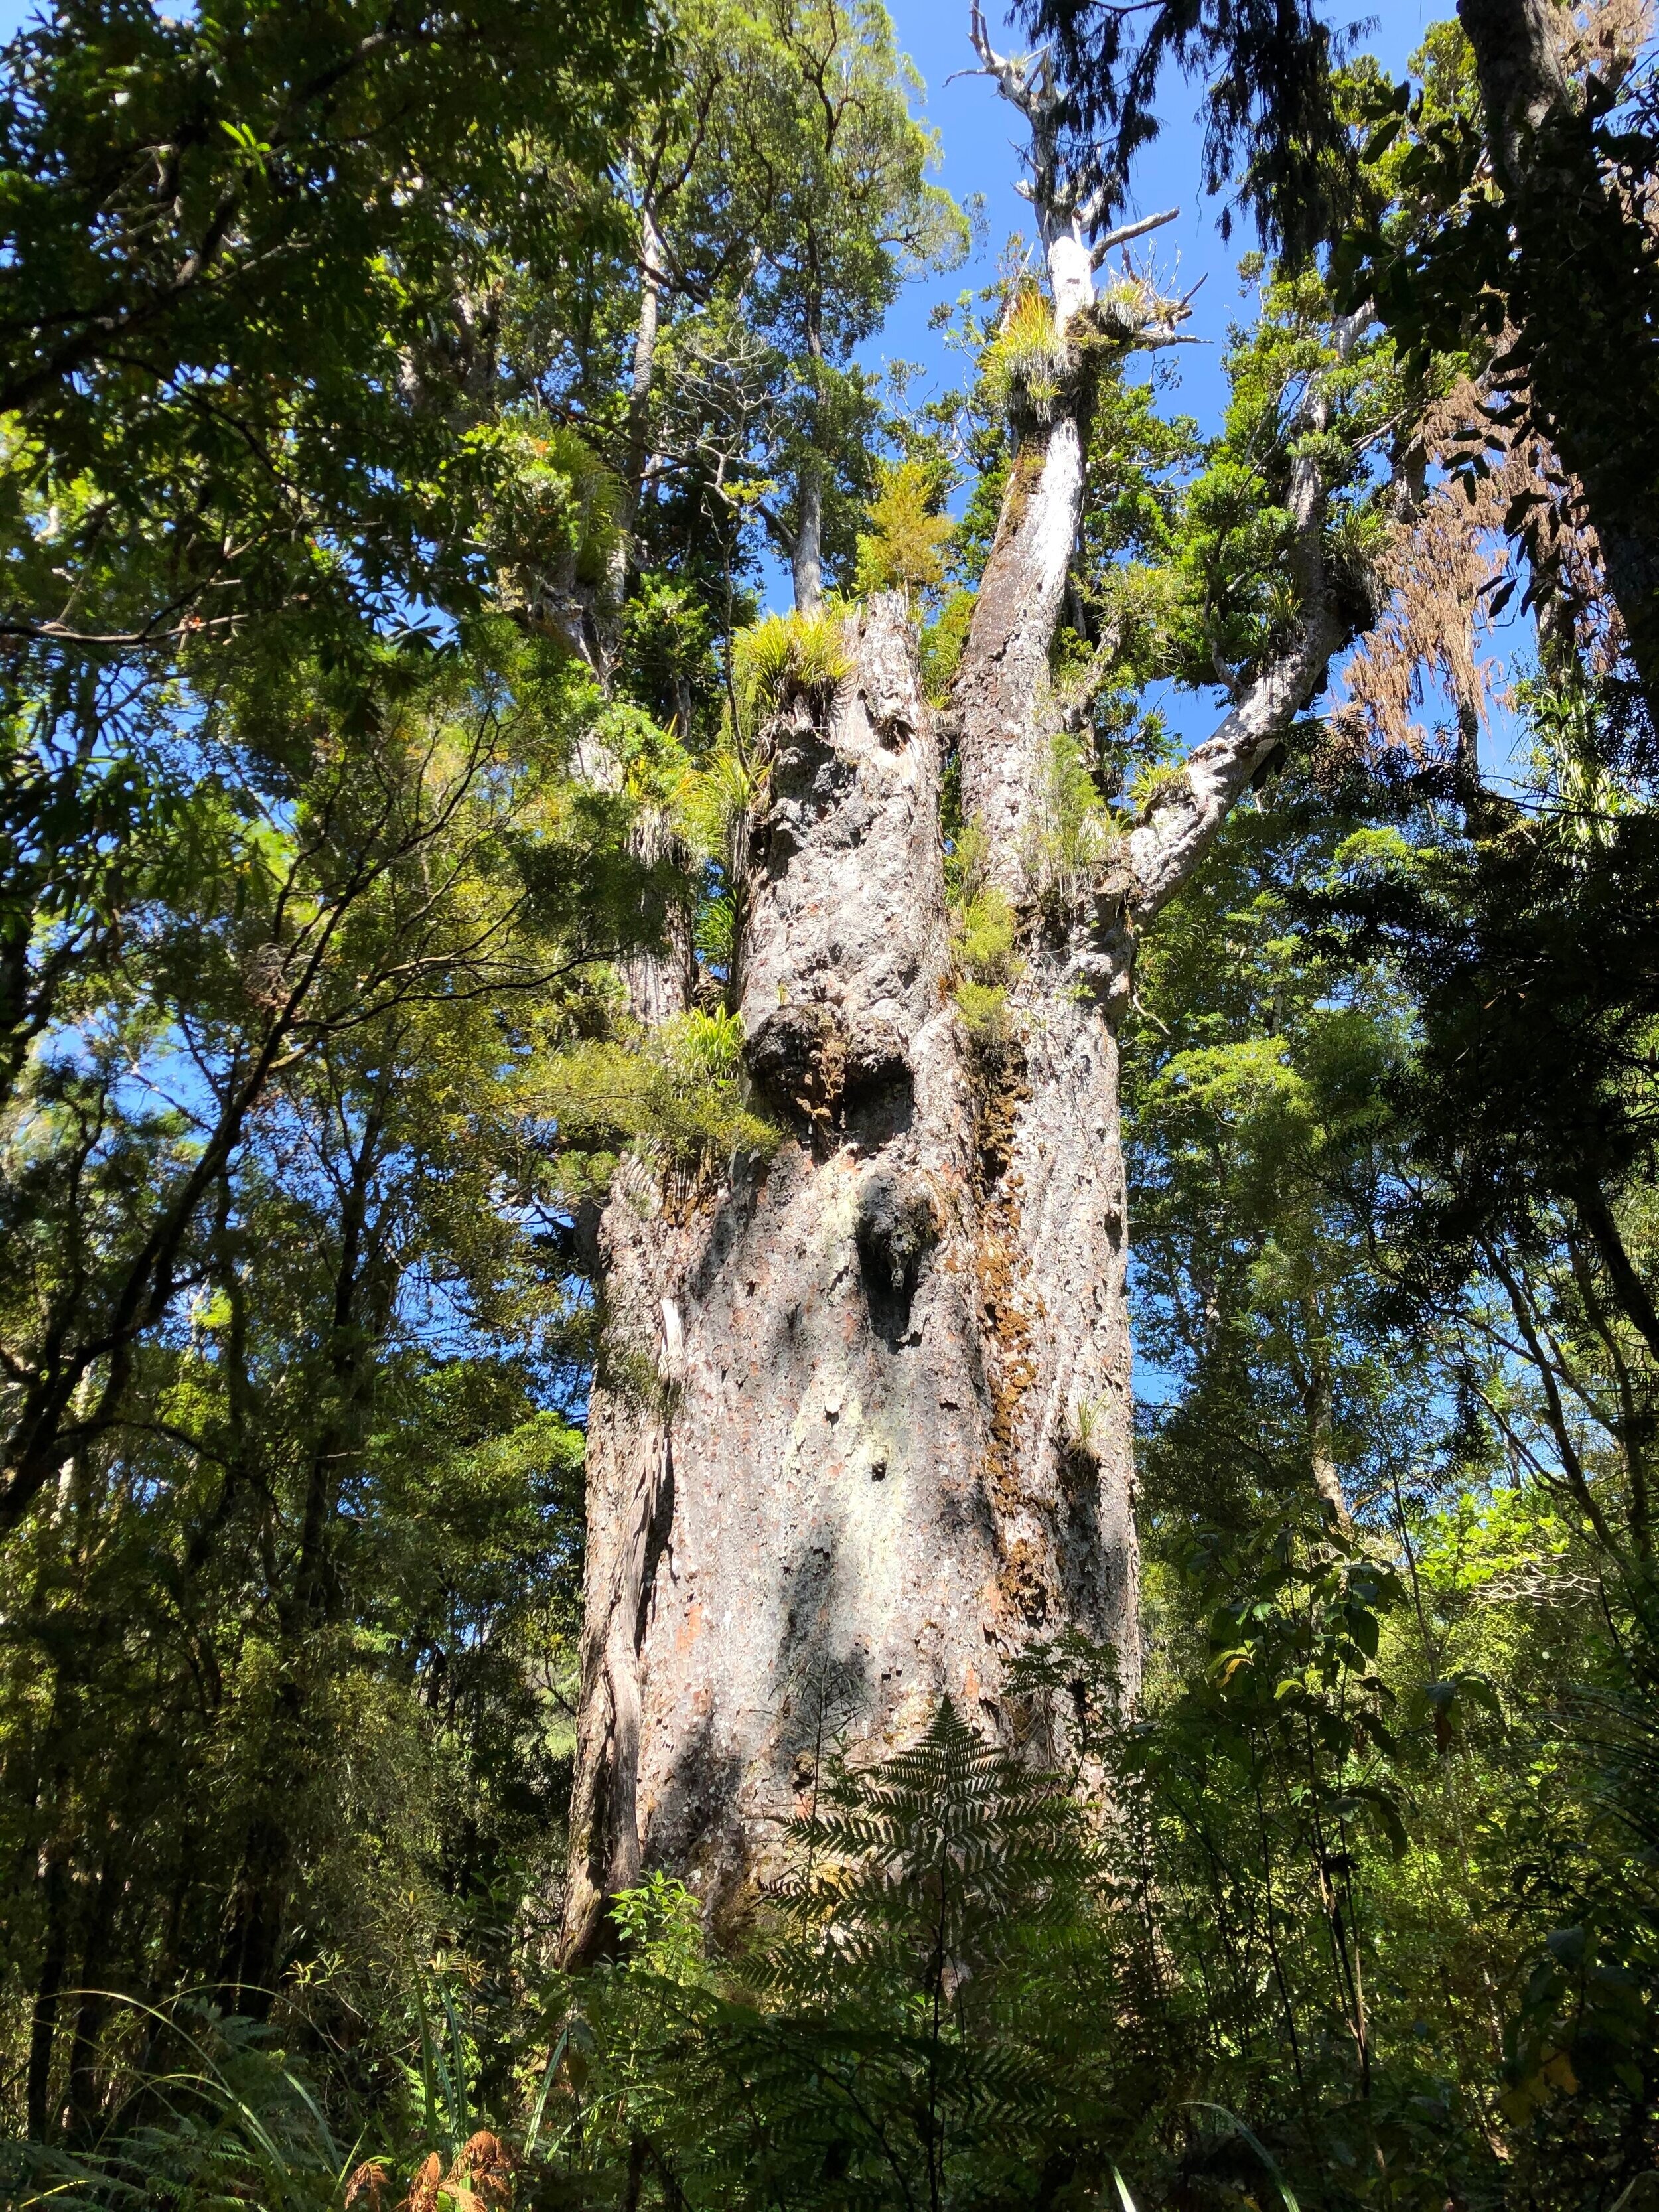  Tane Mahuta, “Lord of the Forest” in the Maori language, is the largest living kauri tree. It is thought to be more than a thousand years of age. Its girth of 13.8 m (45.27 ft) is less than that of Te Matua Ngahere, but its trunk height of 17.7 m (5